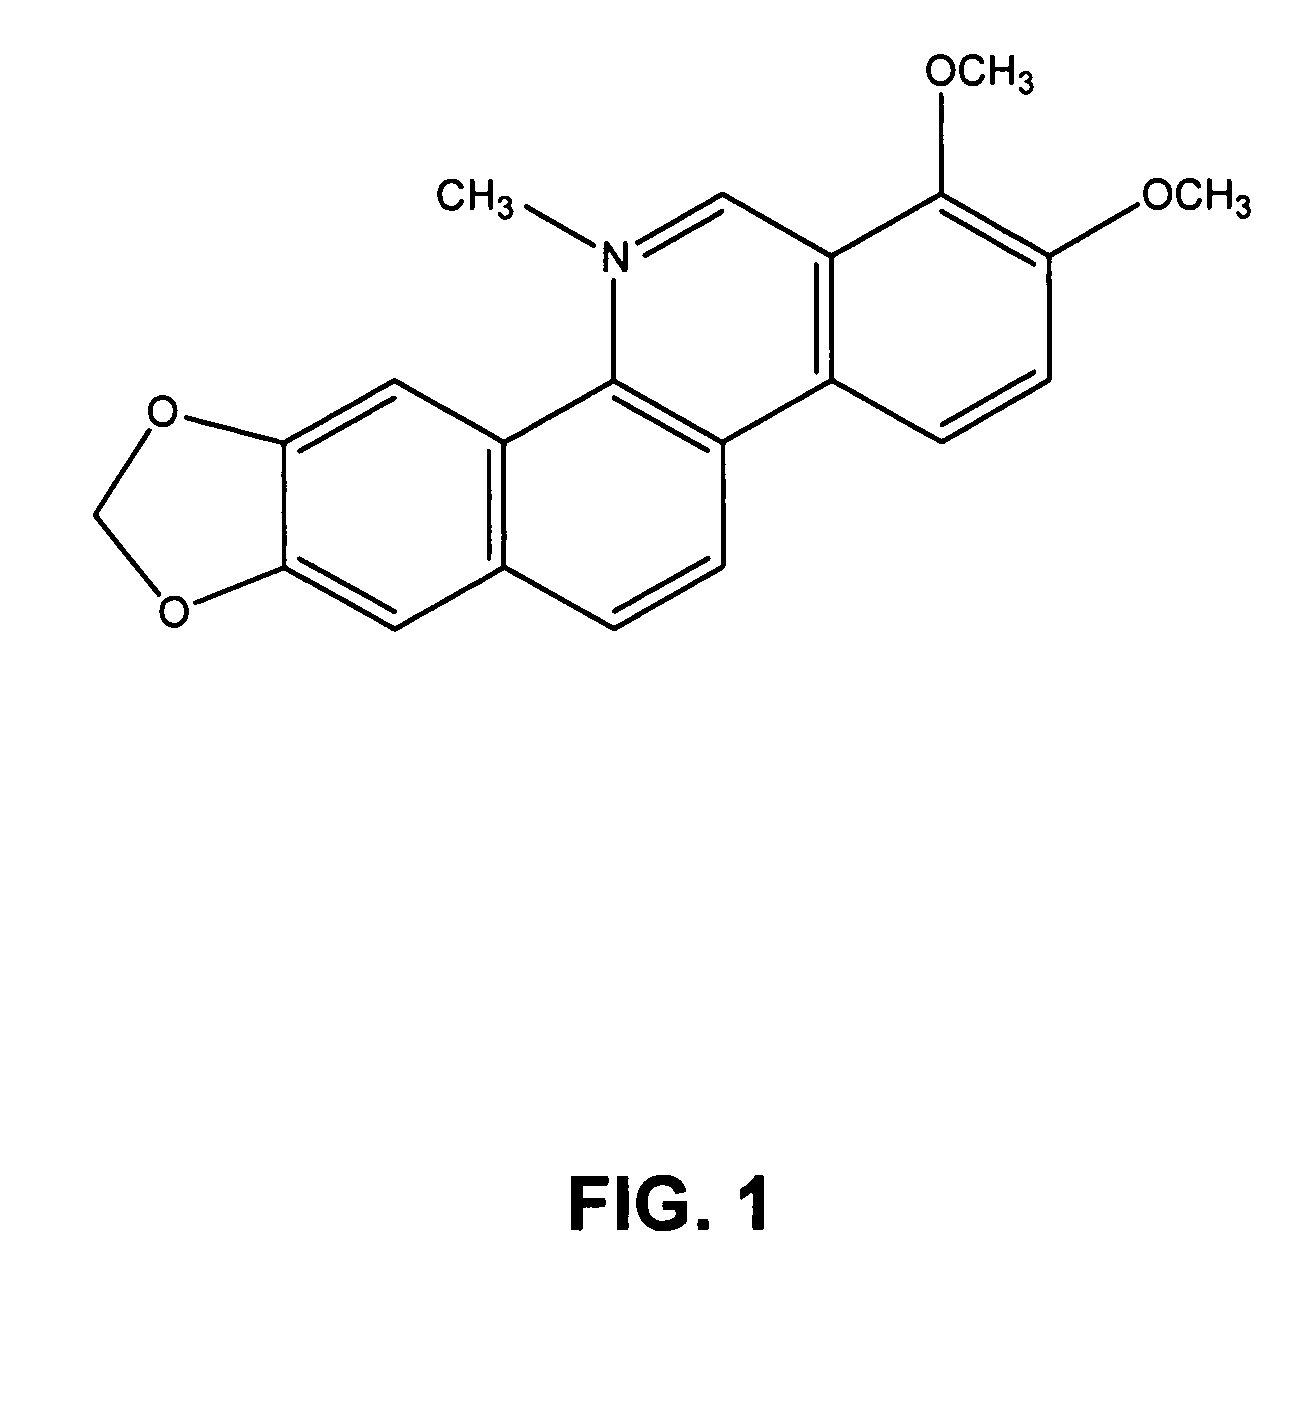 Compositions comprising natural agents for the treatment of HIV-associated opportunistic infections and complications and methods for preparing and using compositions comprising natural agents